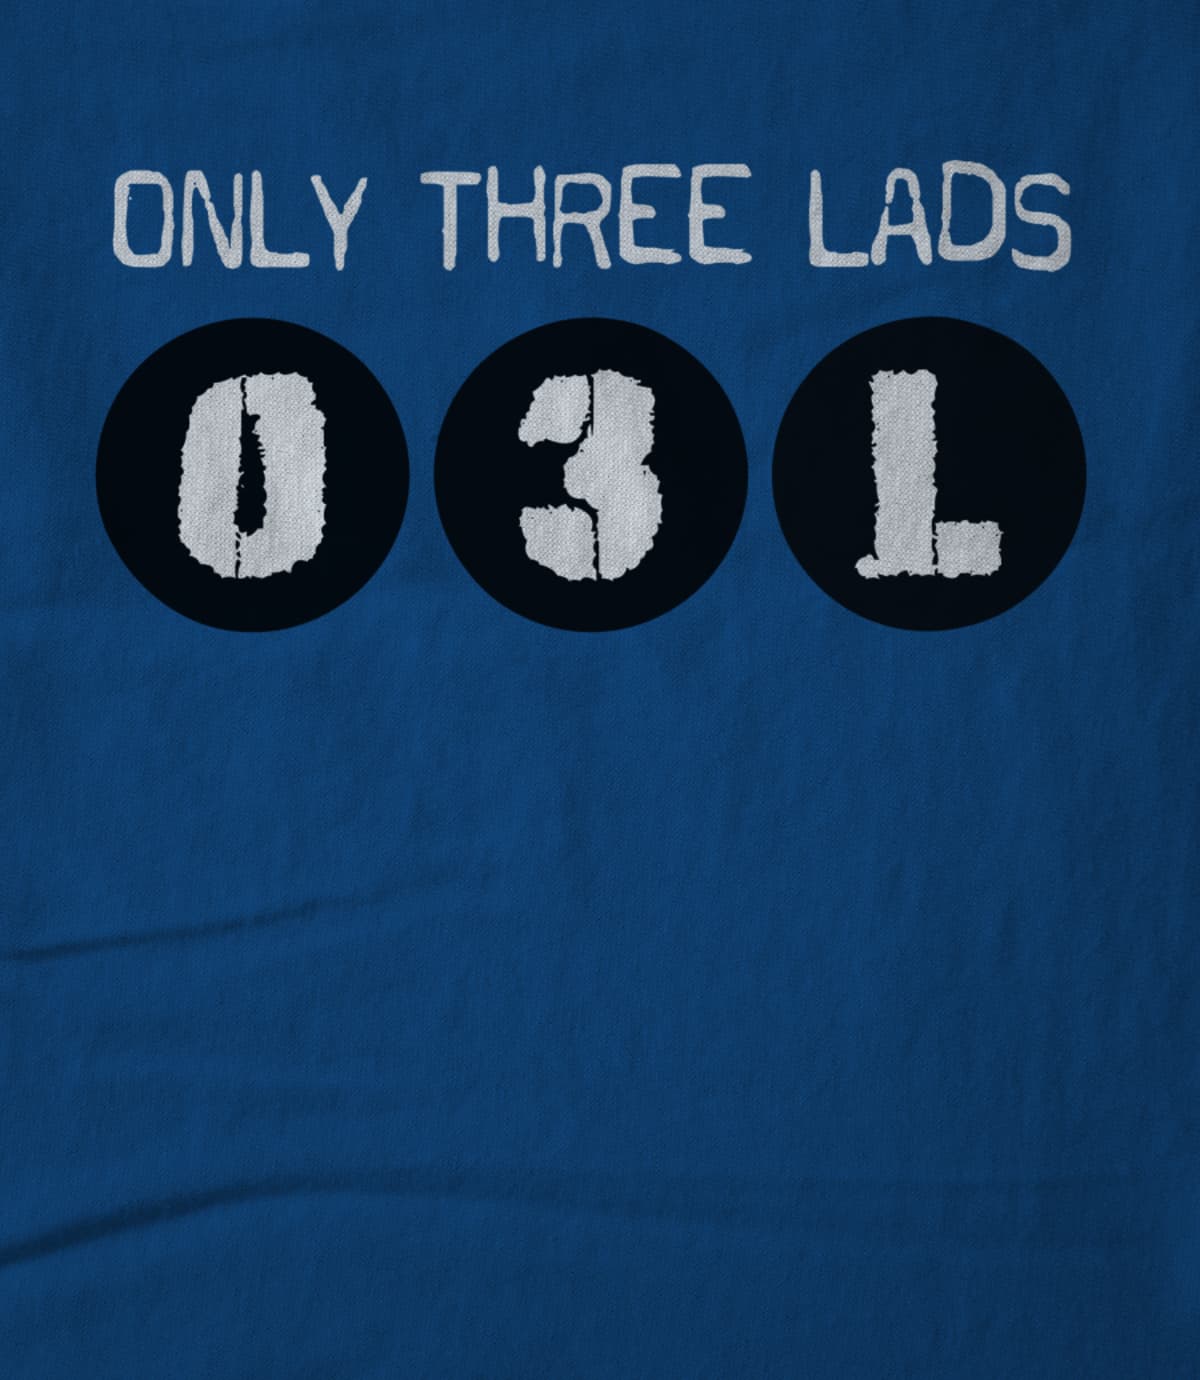 Only three lads o3l podcast   logo design  cardinal red  1579509960